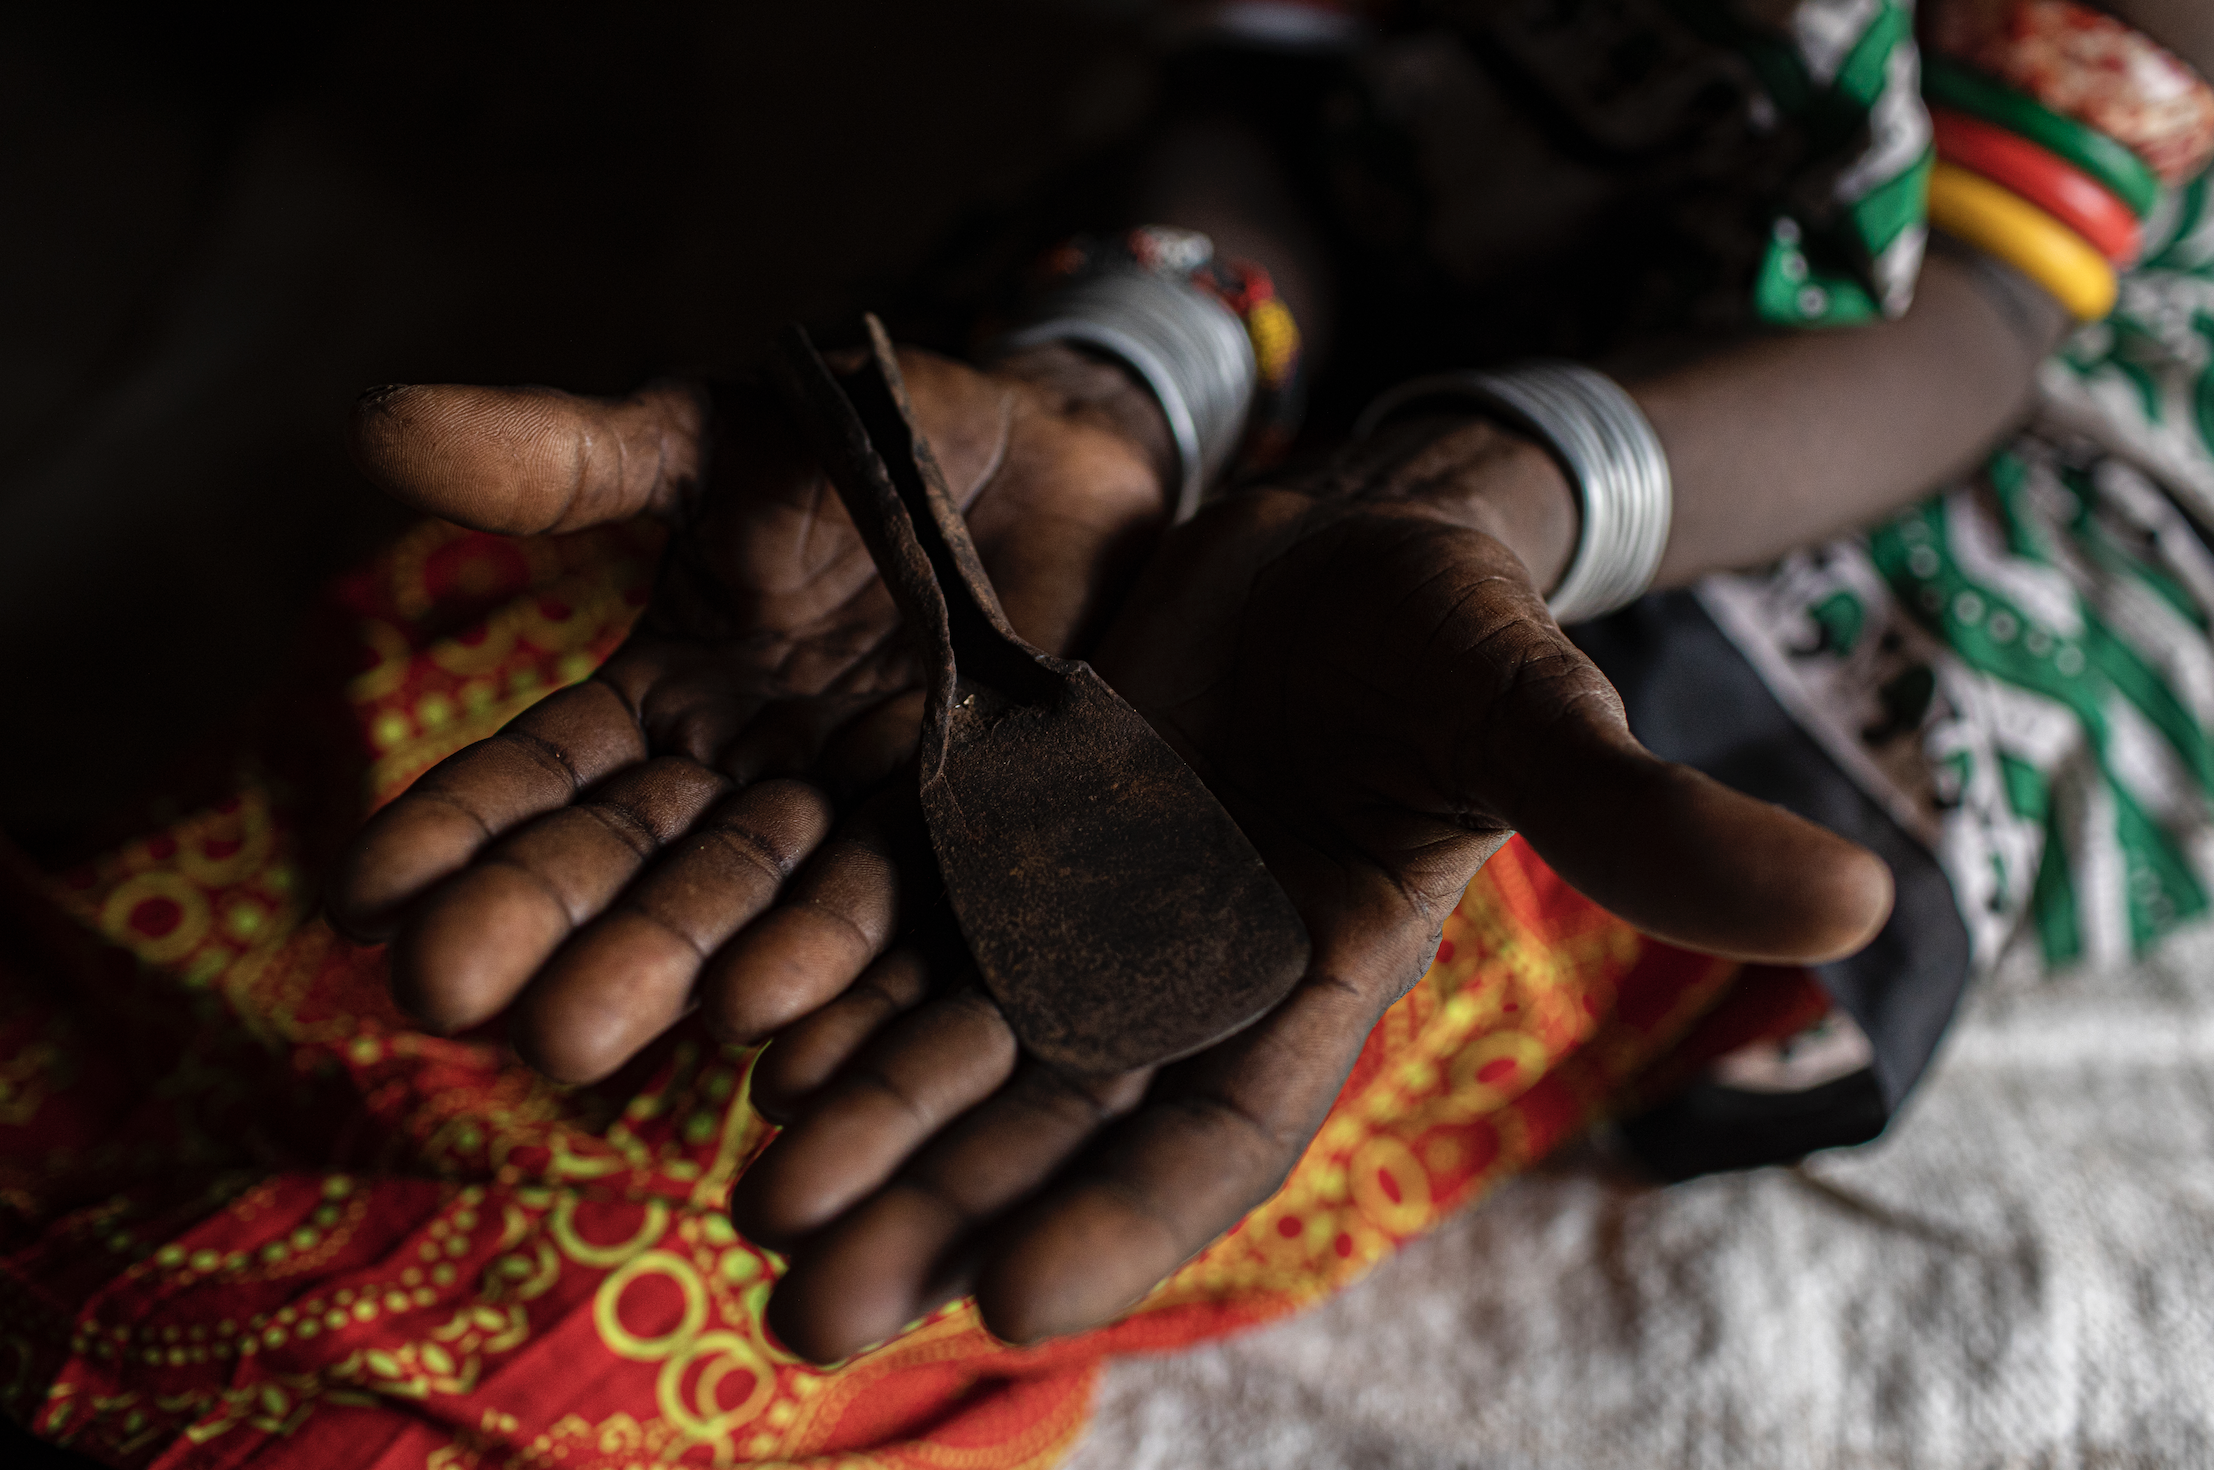 Christine Lemowonapi, a former Rendille circumciser, holds a tool she once used to perform FGC at her home in Merille, Kenya. Image by Will Swanson. Kenya, 2020.